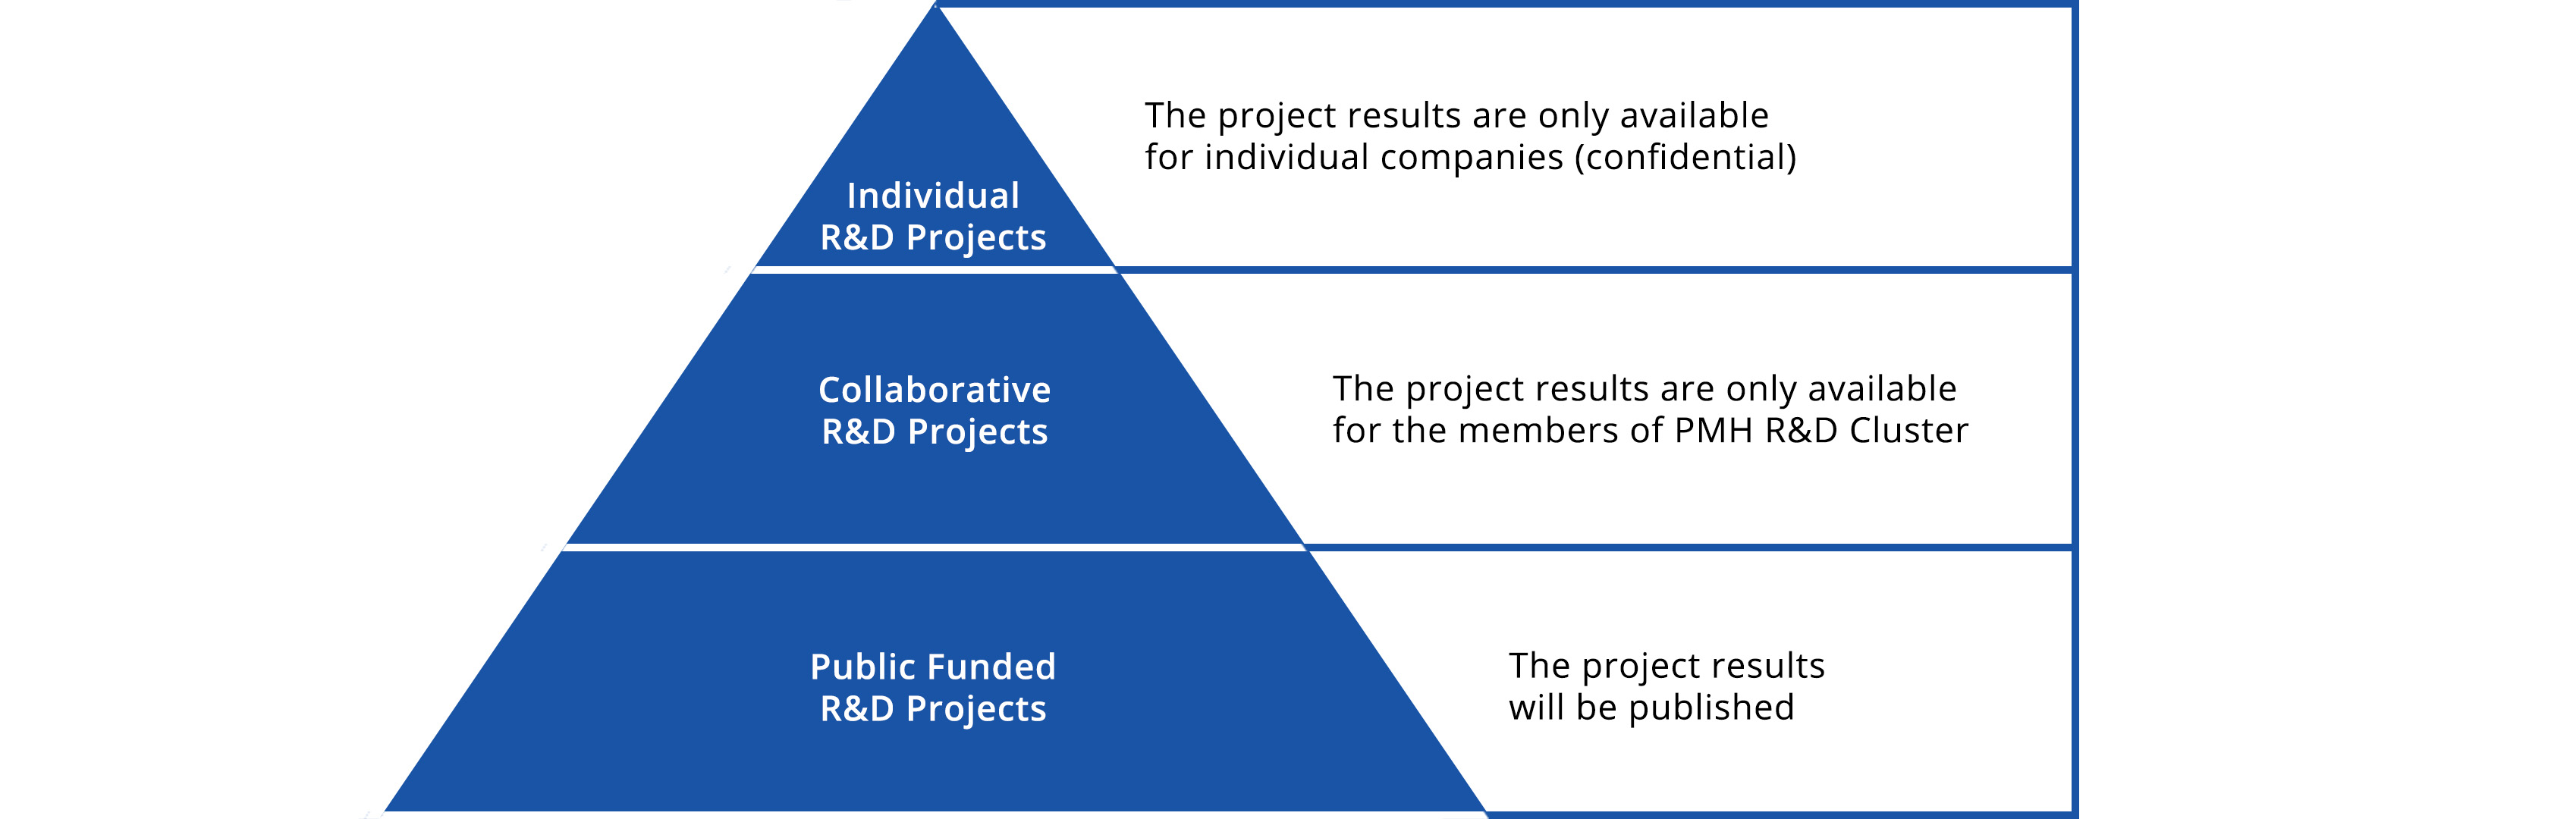 The triangle of projects in the PMH R&D Cluster.